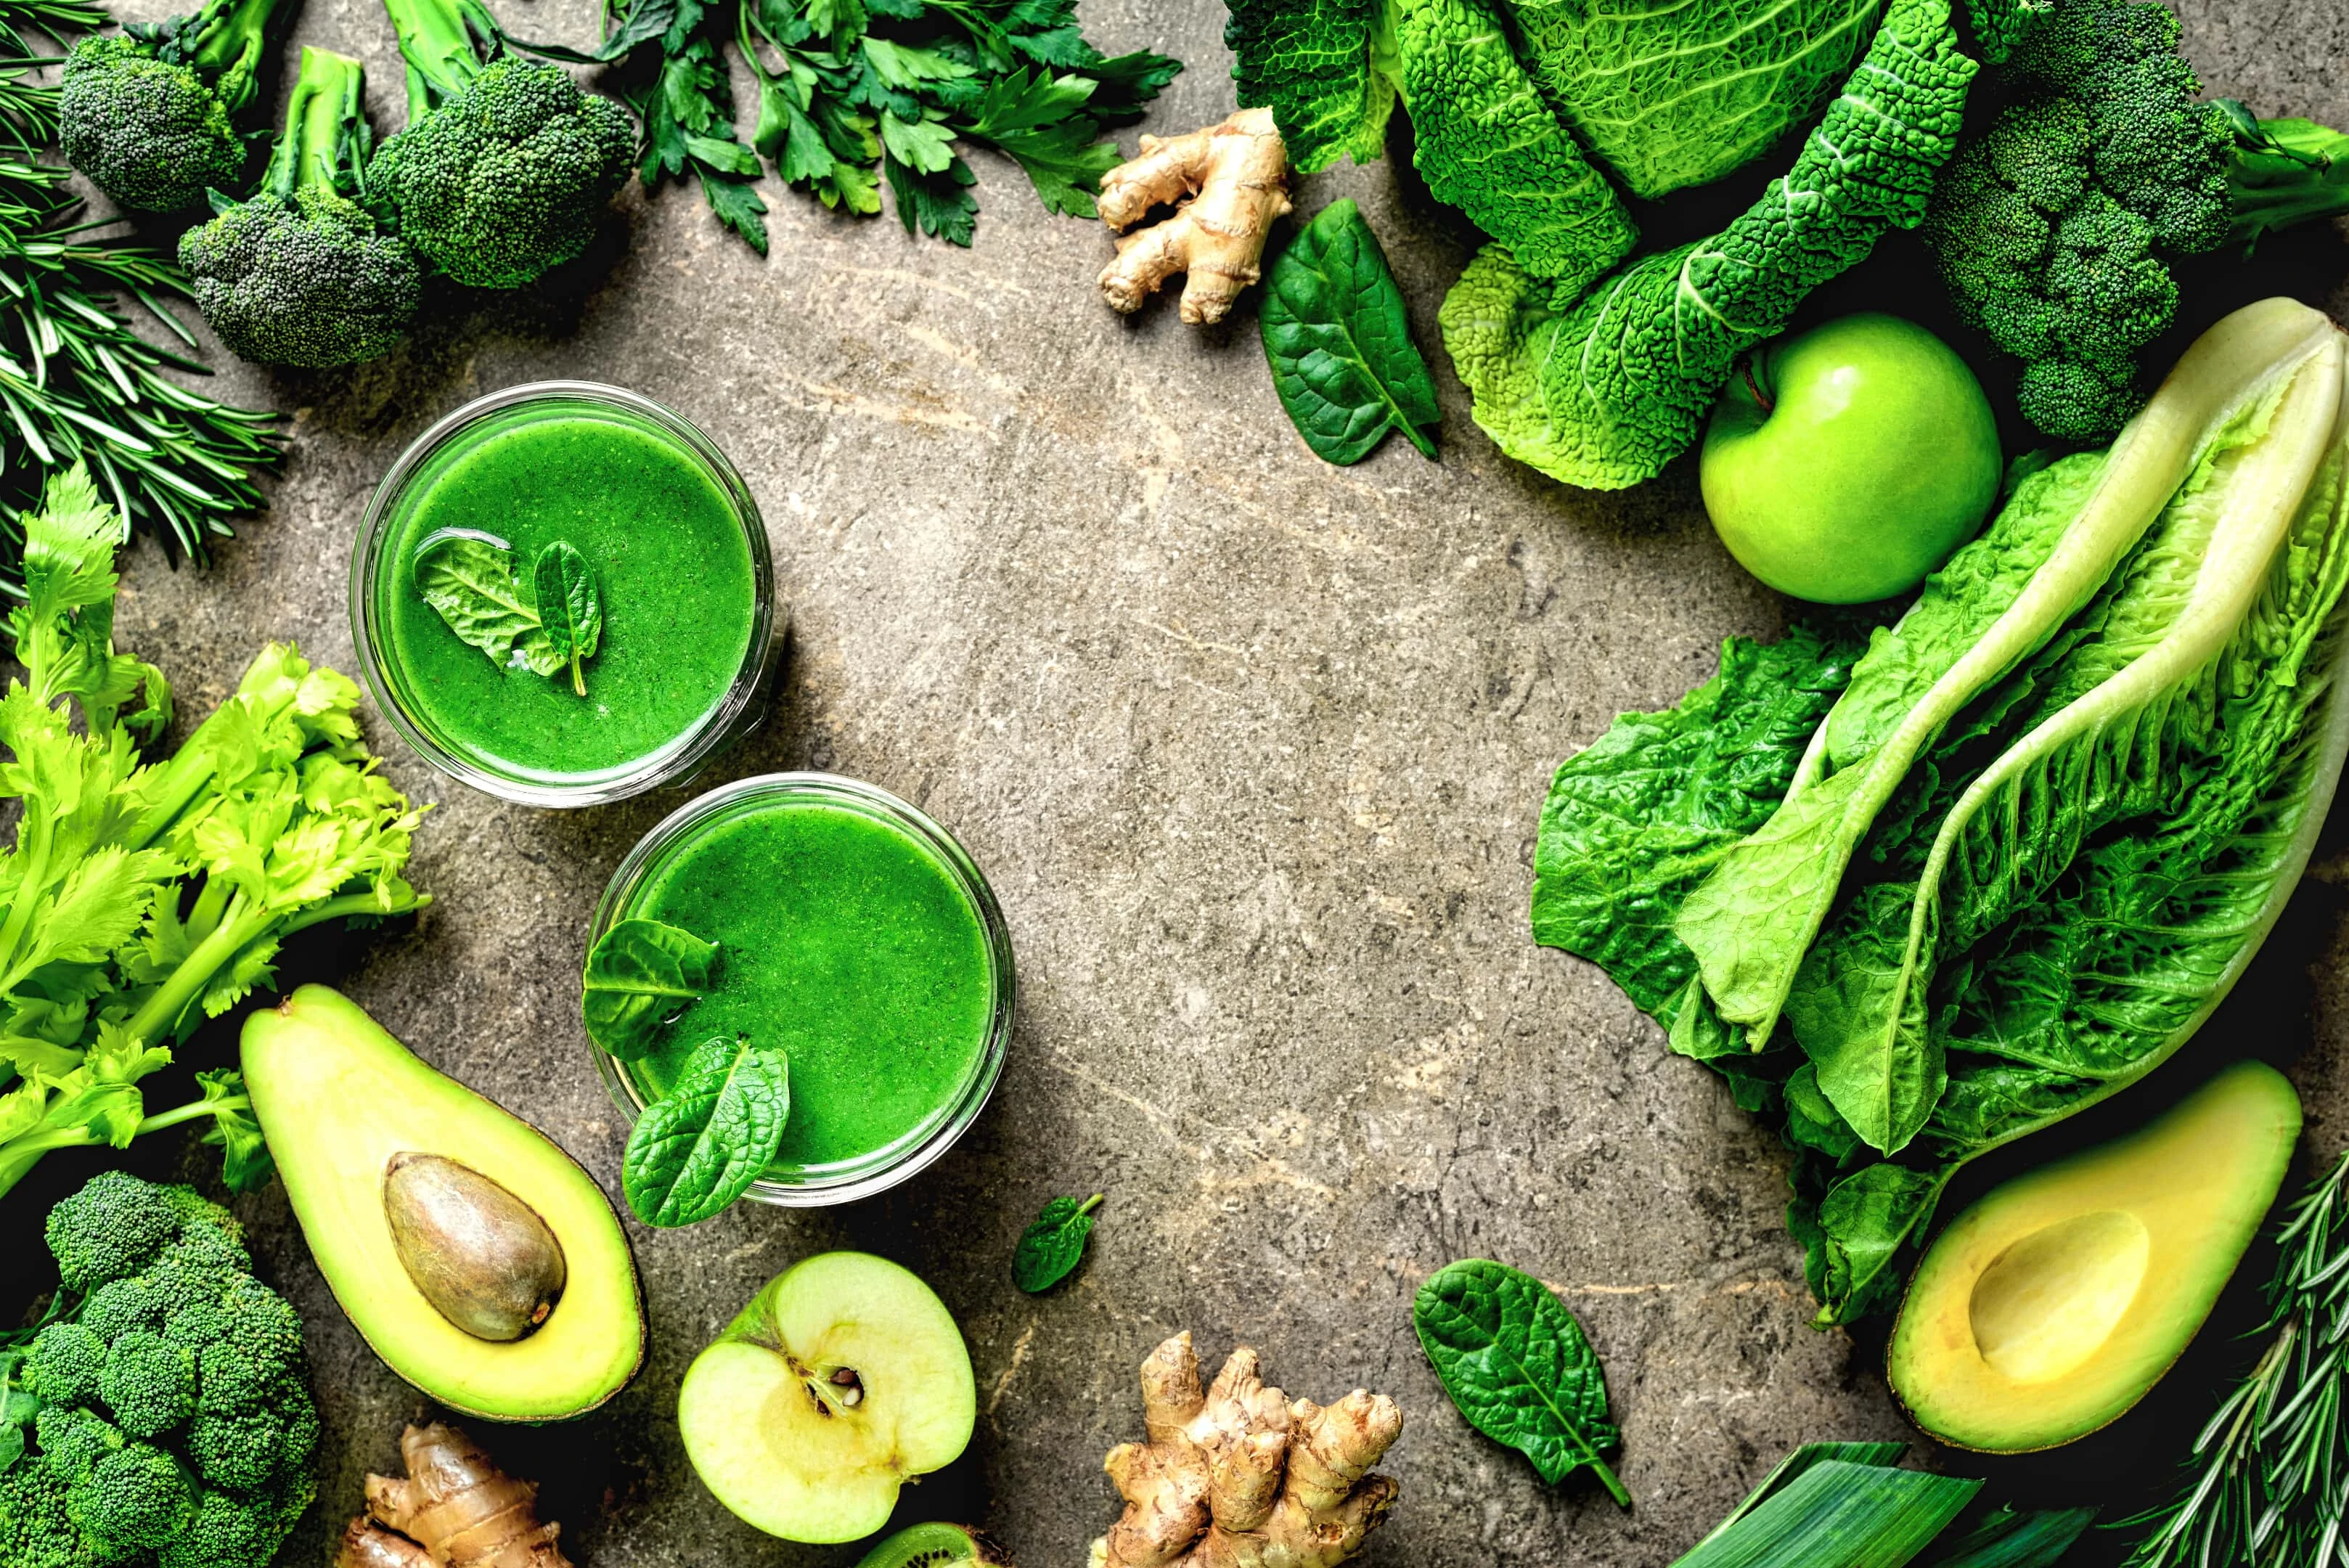 Green fruits and dark green leafy vegetables with two green smoothies glasses